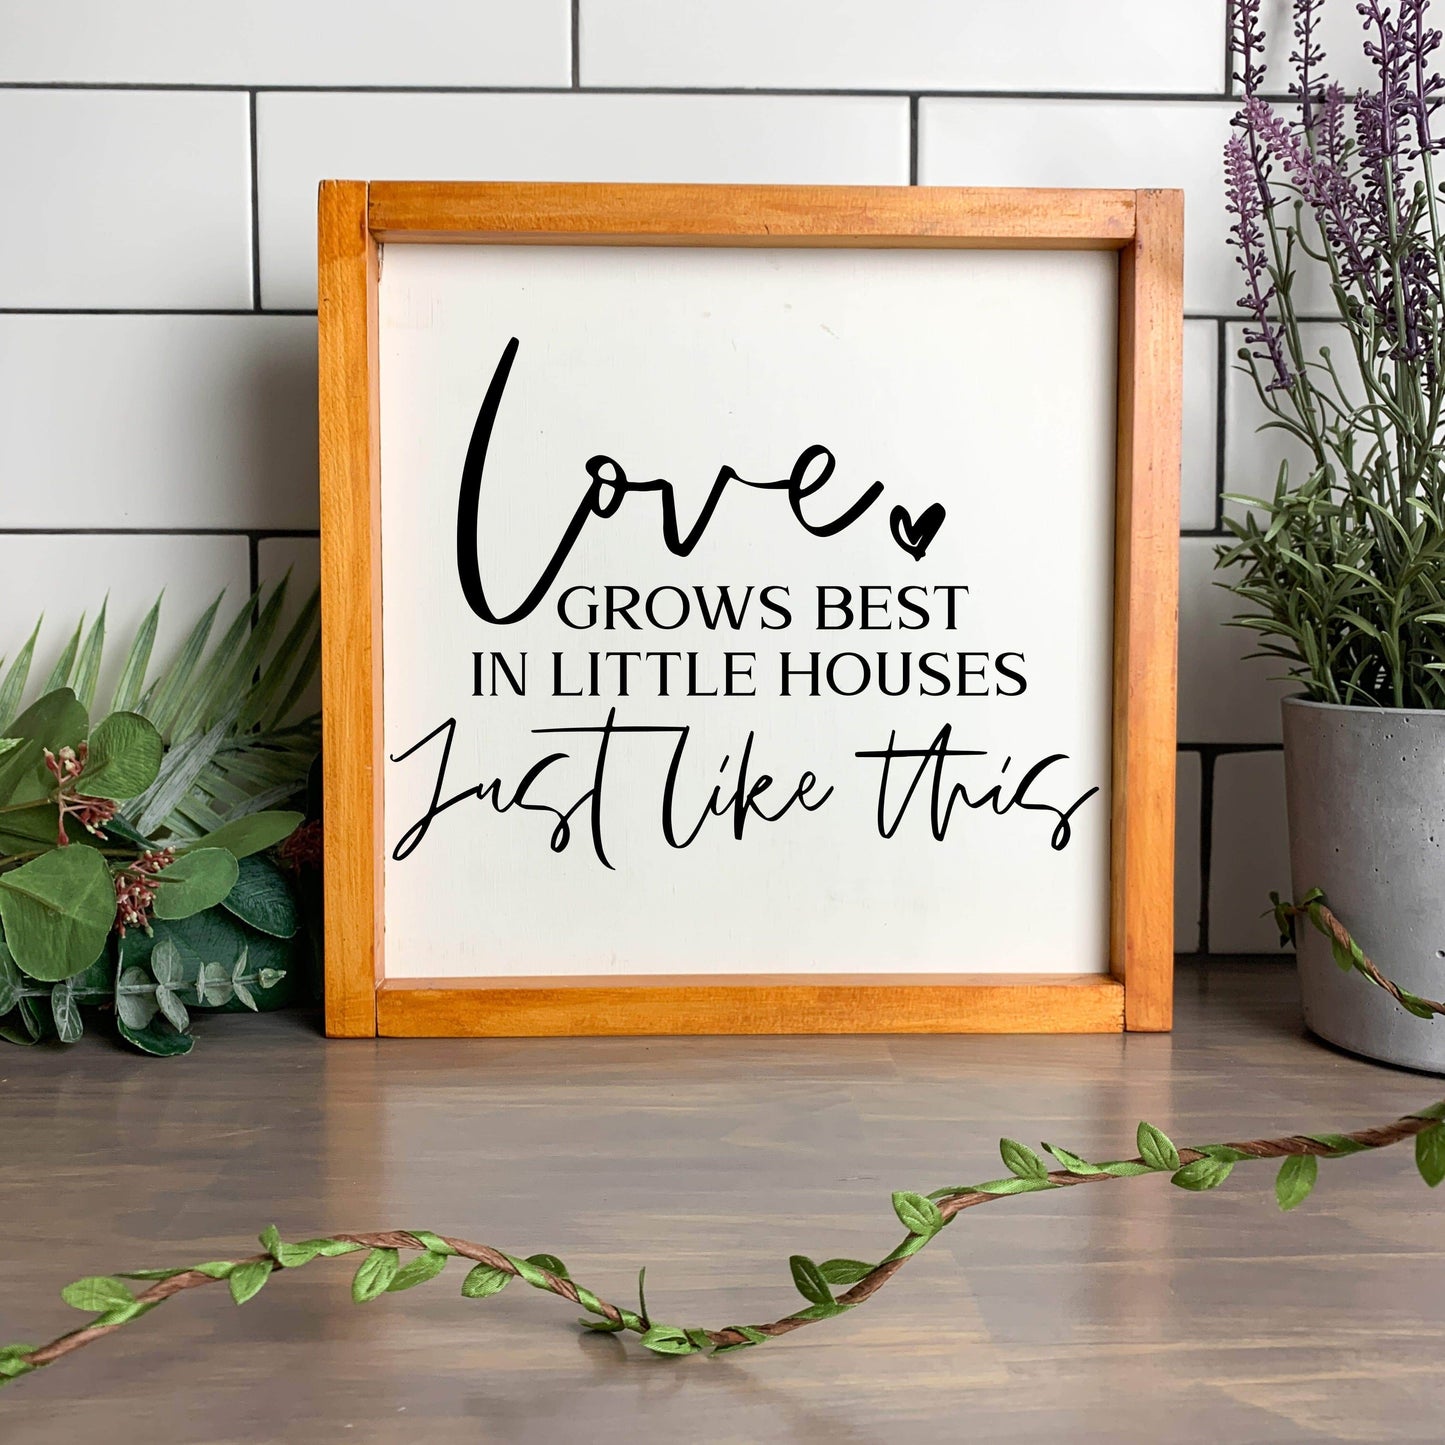 Love Grows best in Little homes framed wood sign, farmhouse sign, rustic decor, home decor